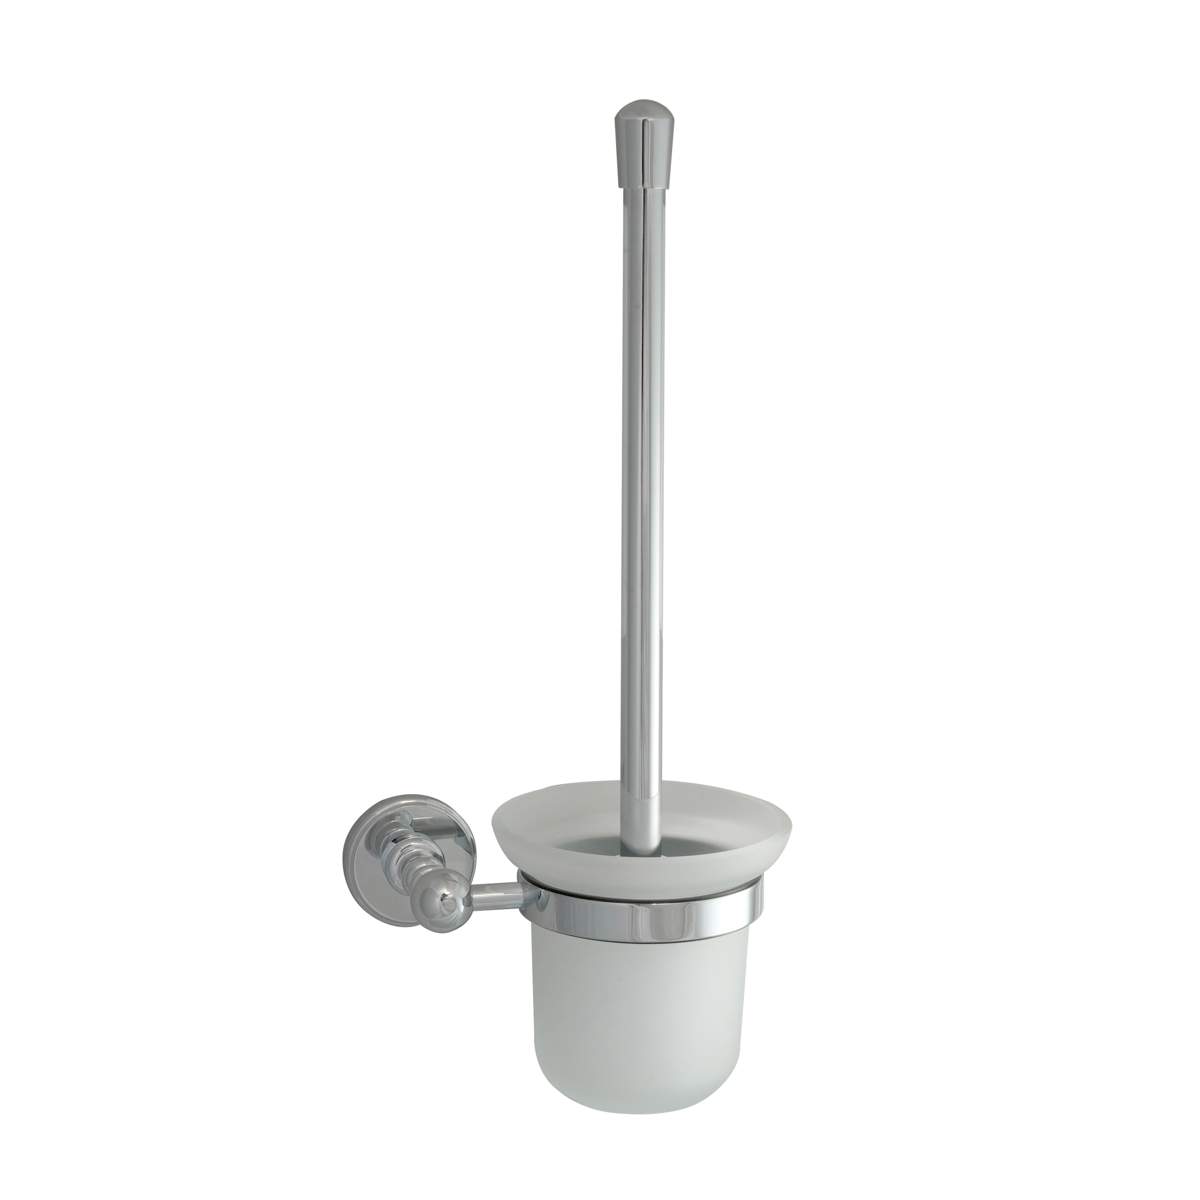 JTP Grosvenor Cross Chrome Wall Mounted Toilet Brush Frosted Glass (GR165CH)